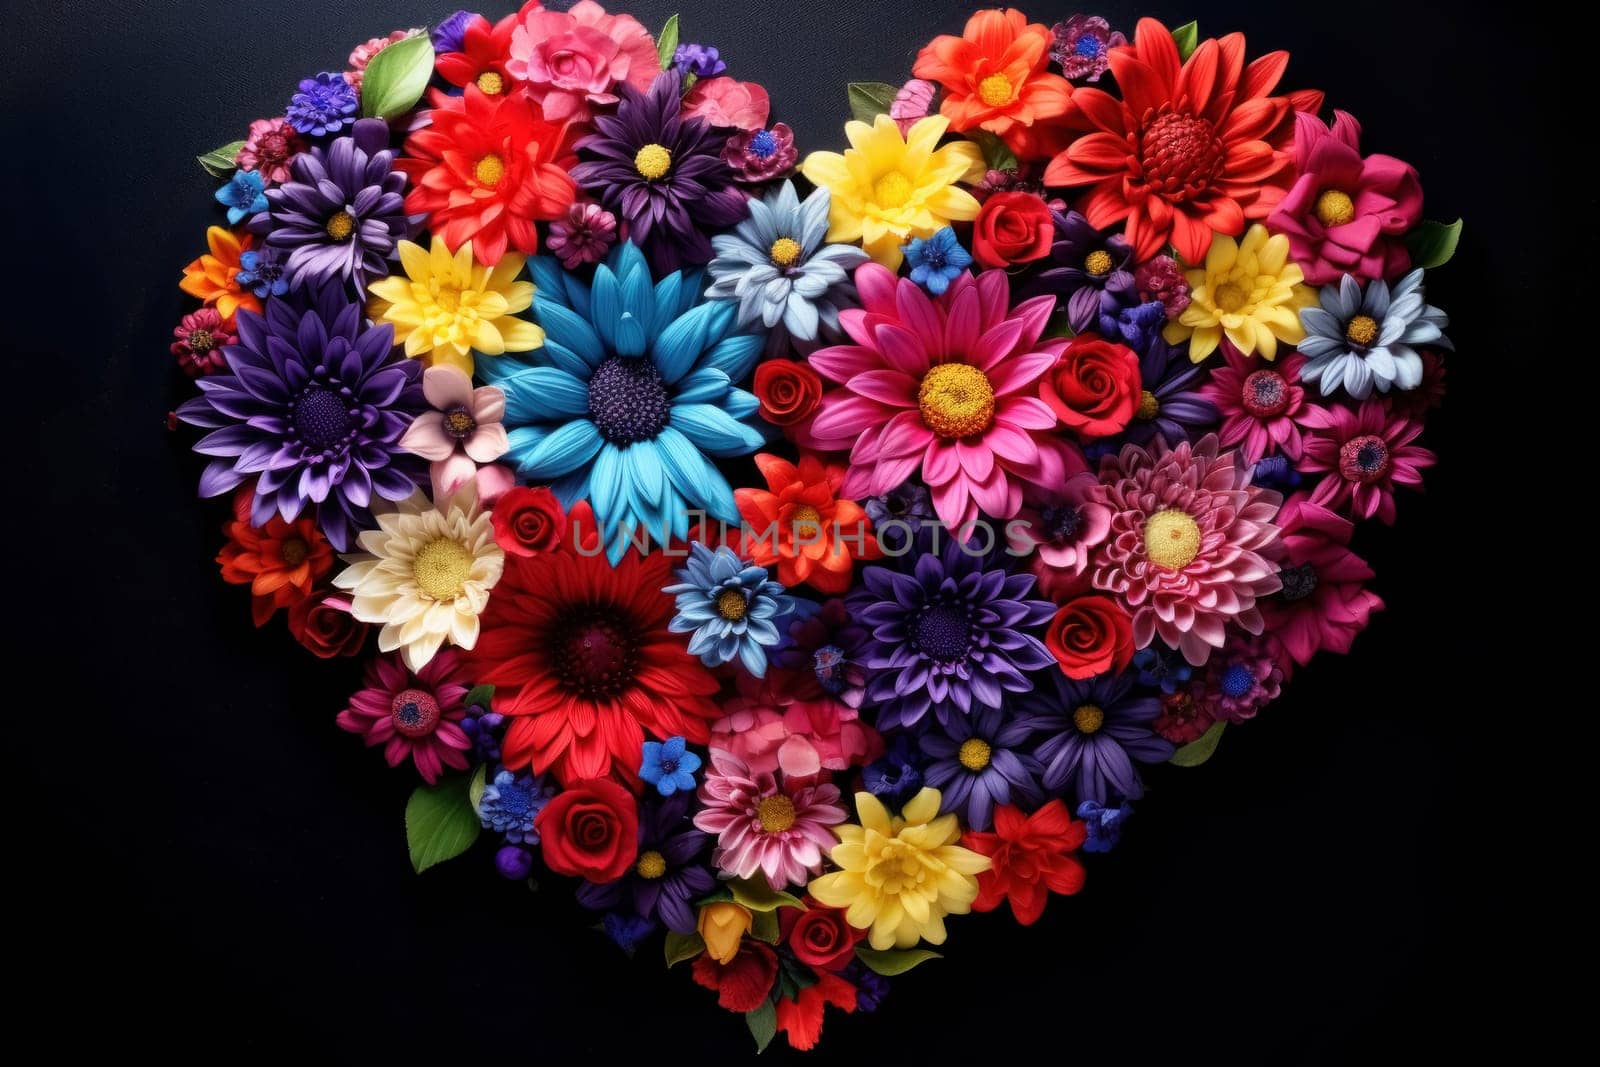 Colorful Blossom Heart on Black by andreyz